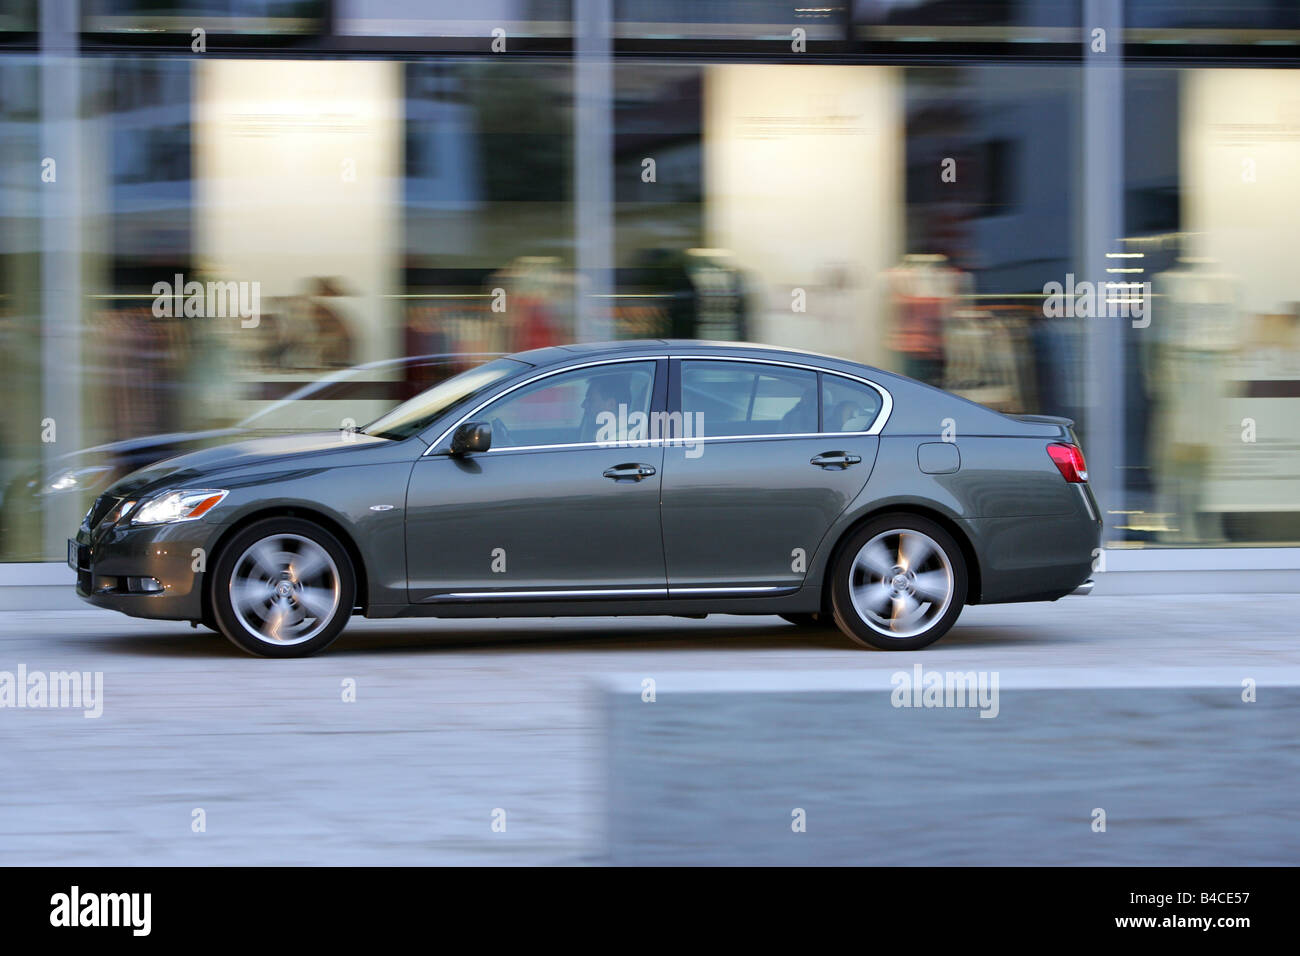 Car Lexus Gs 300 Model High Resolution Stock Photography And Images Alamy